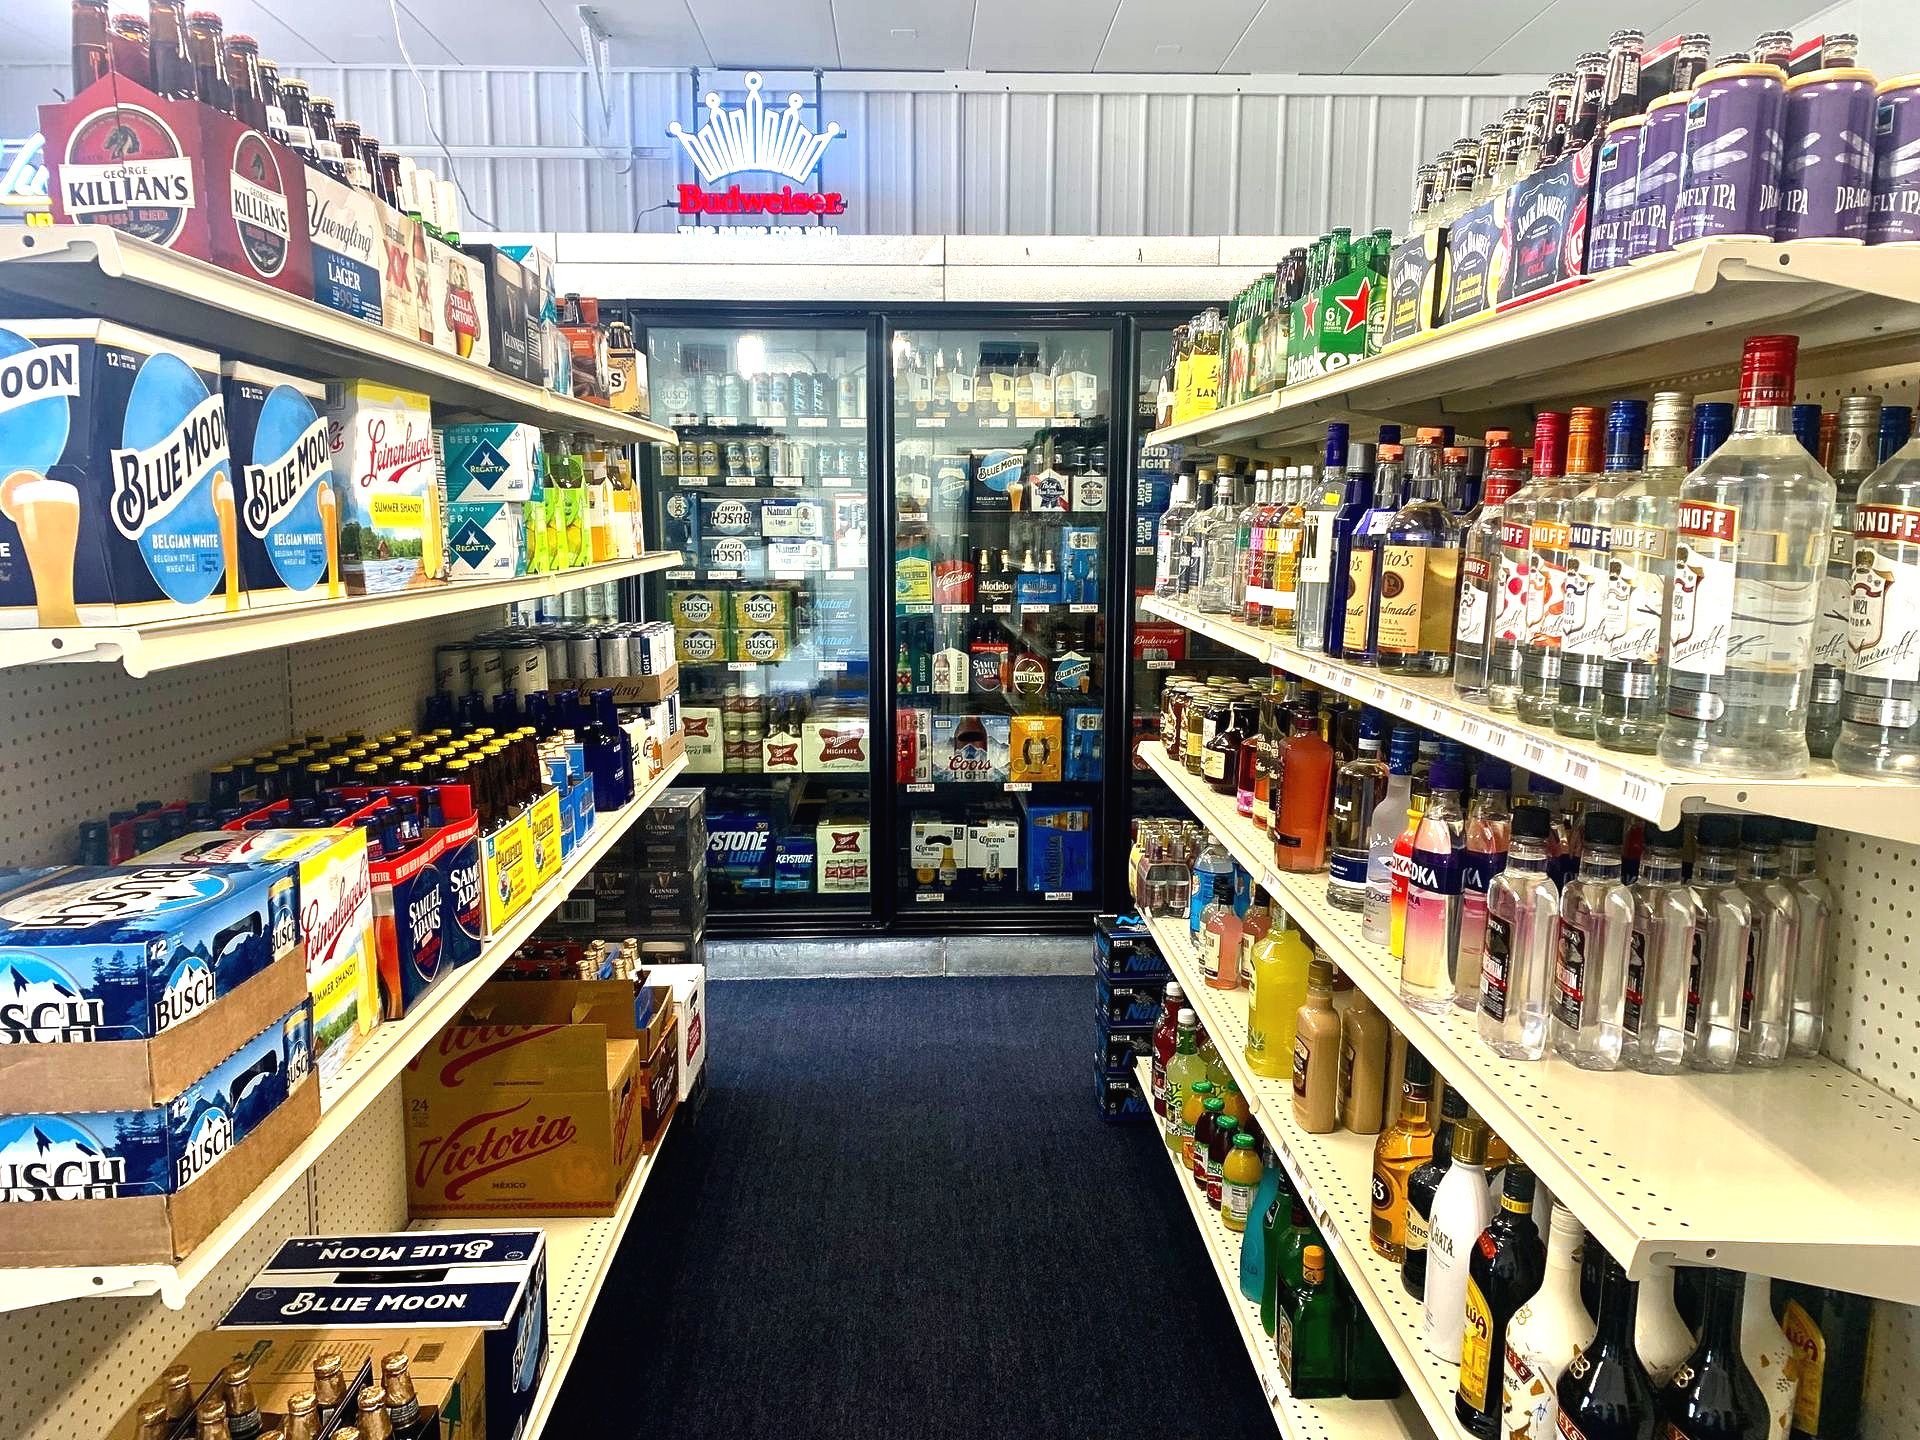 A liquor store filled with lots of beer and liquor